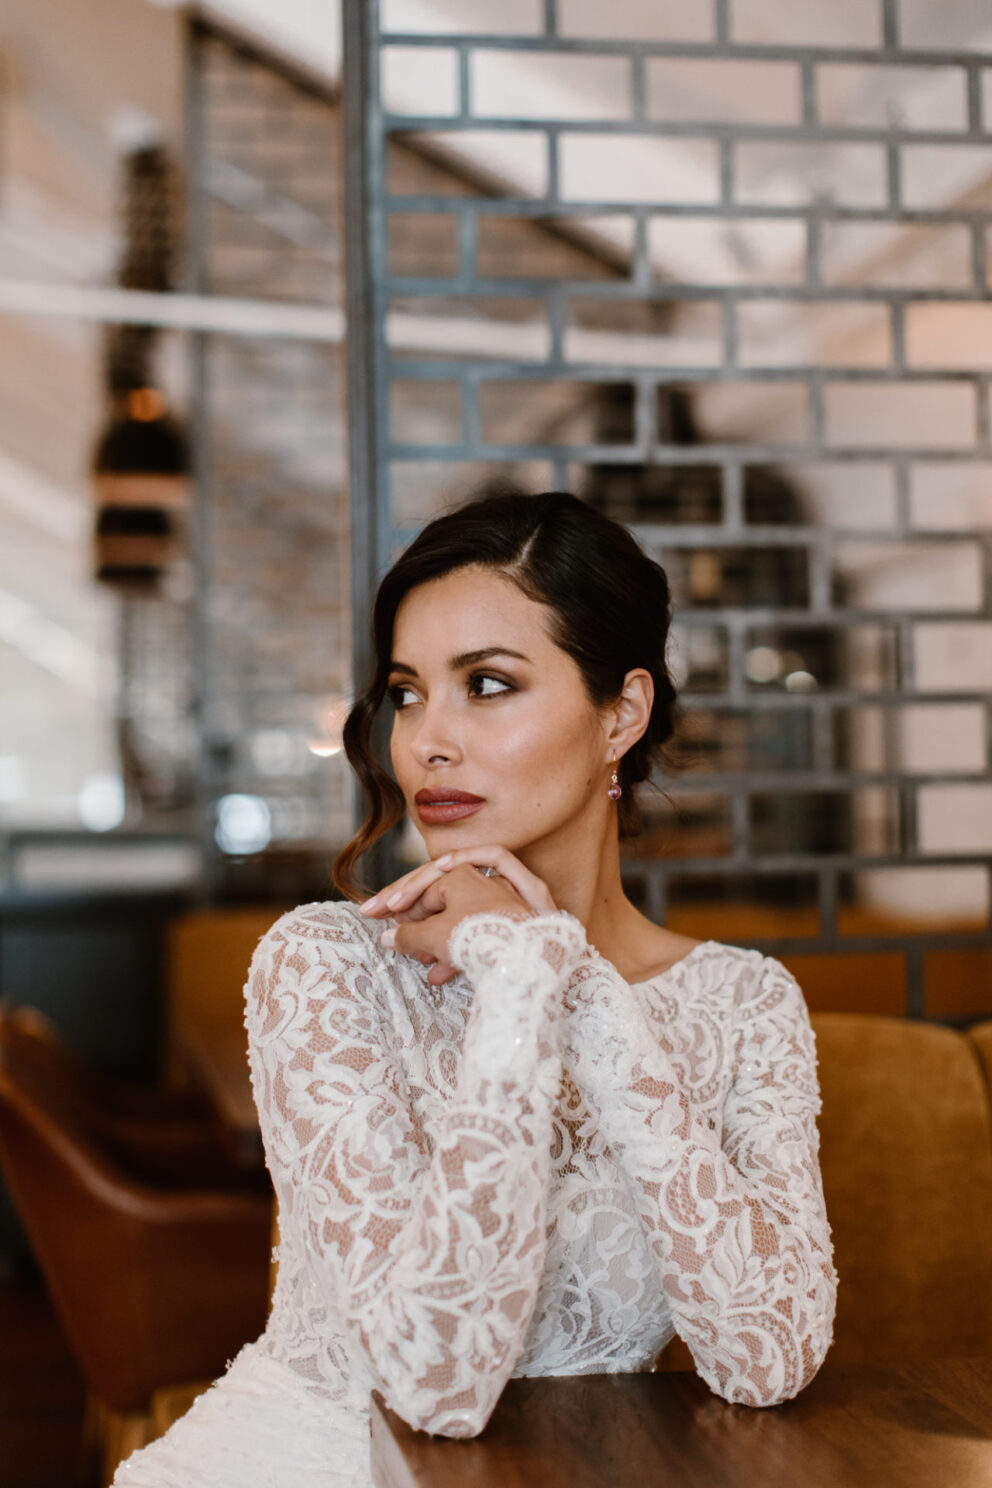 This stunning high neck long sleeve wedding gown is pure elegance. A delicate floral lace carefully hugs the body accentuating the fit & flare silhouette. stunning high neck long sleeve wedding gown is pure elegance. A delicate floral lace carefully hugs the body accentuating the fit & flare silhouette.